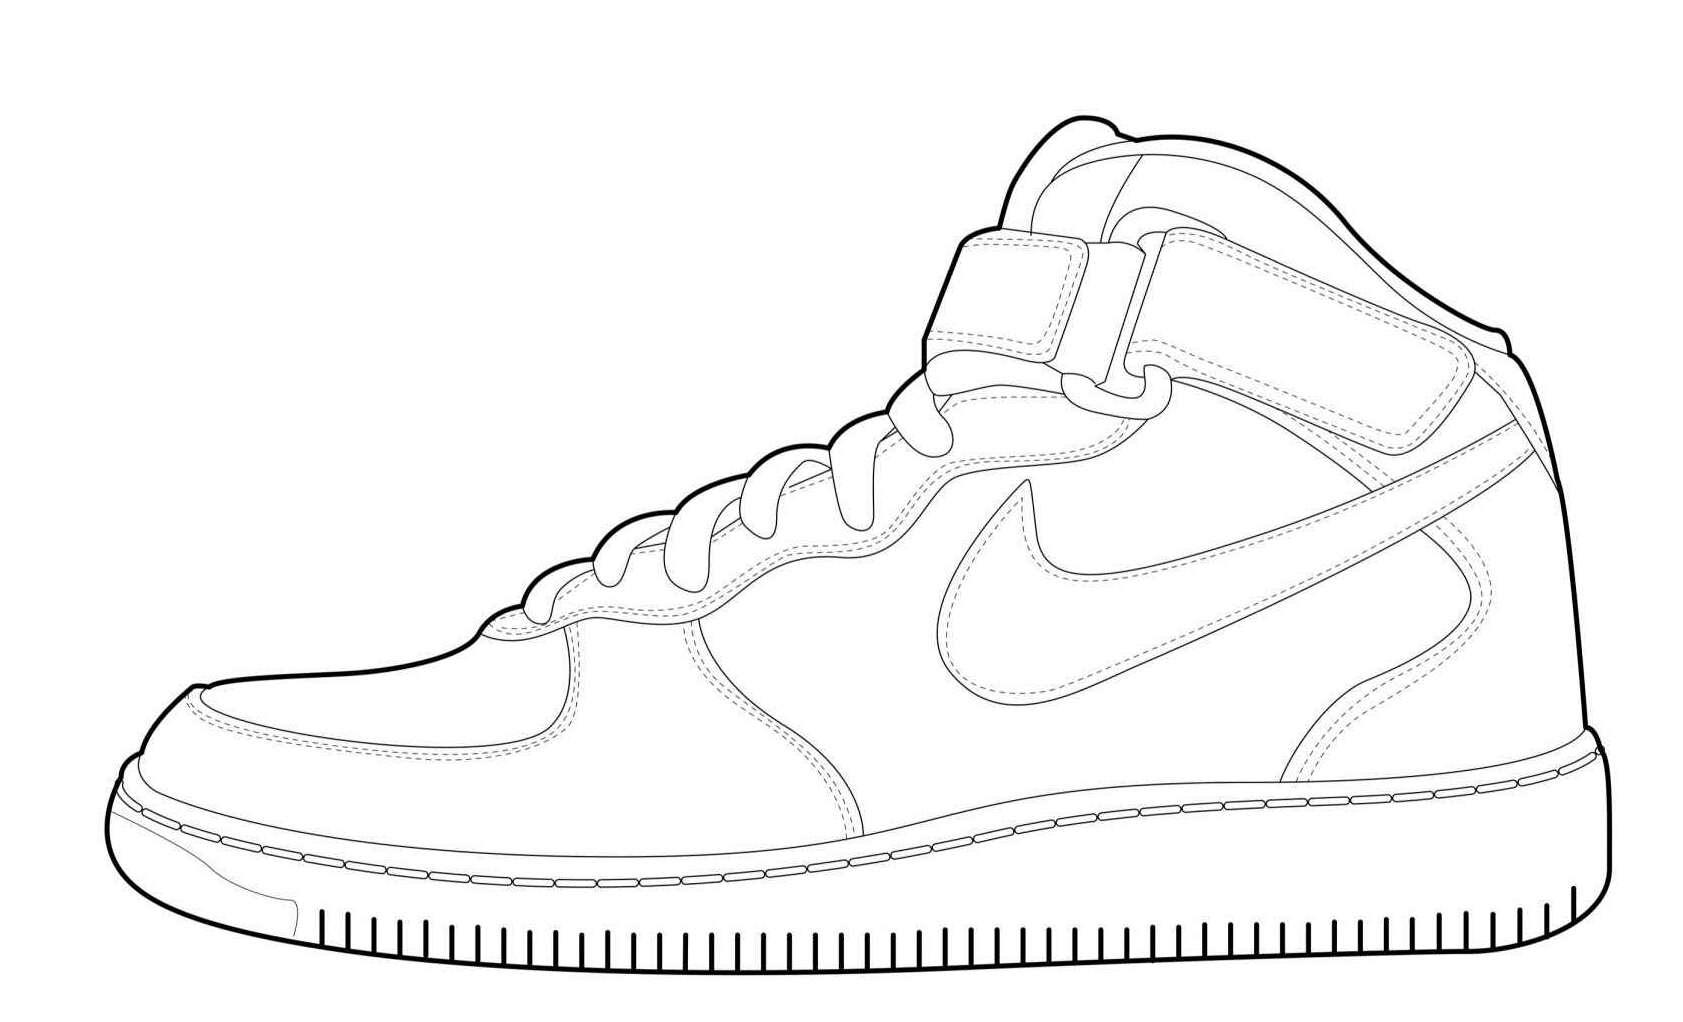 Cool Nike Shoes 9 Coloring Page